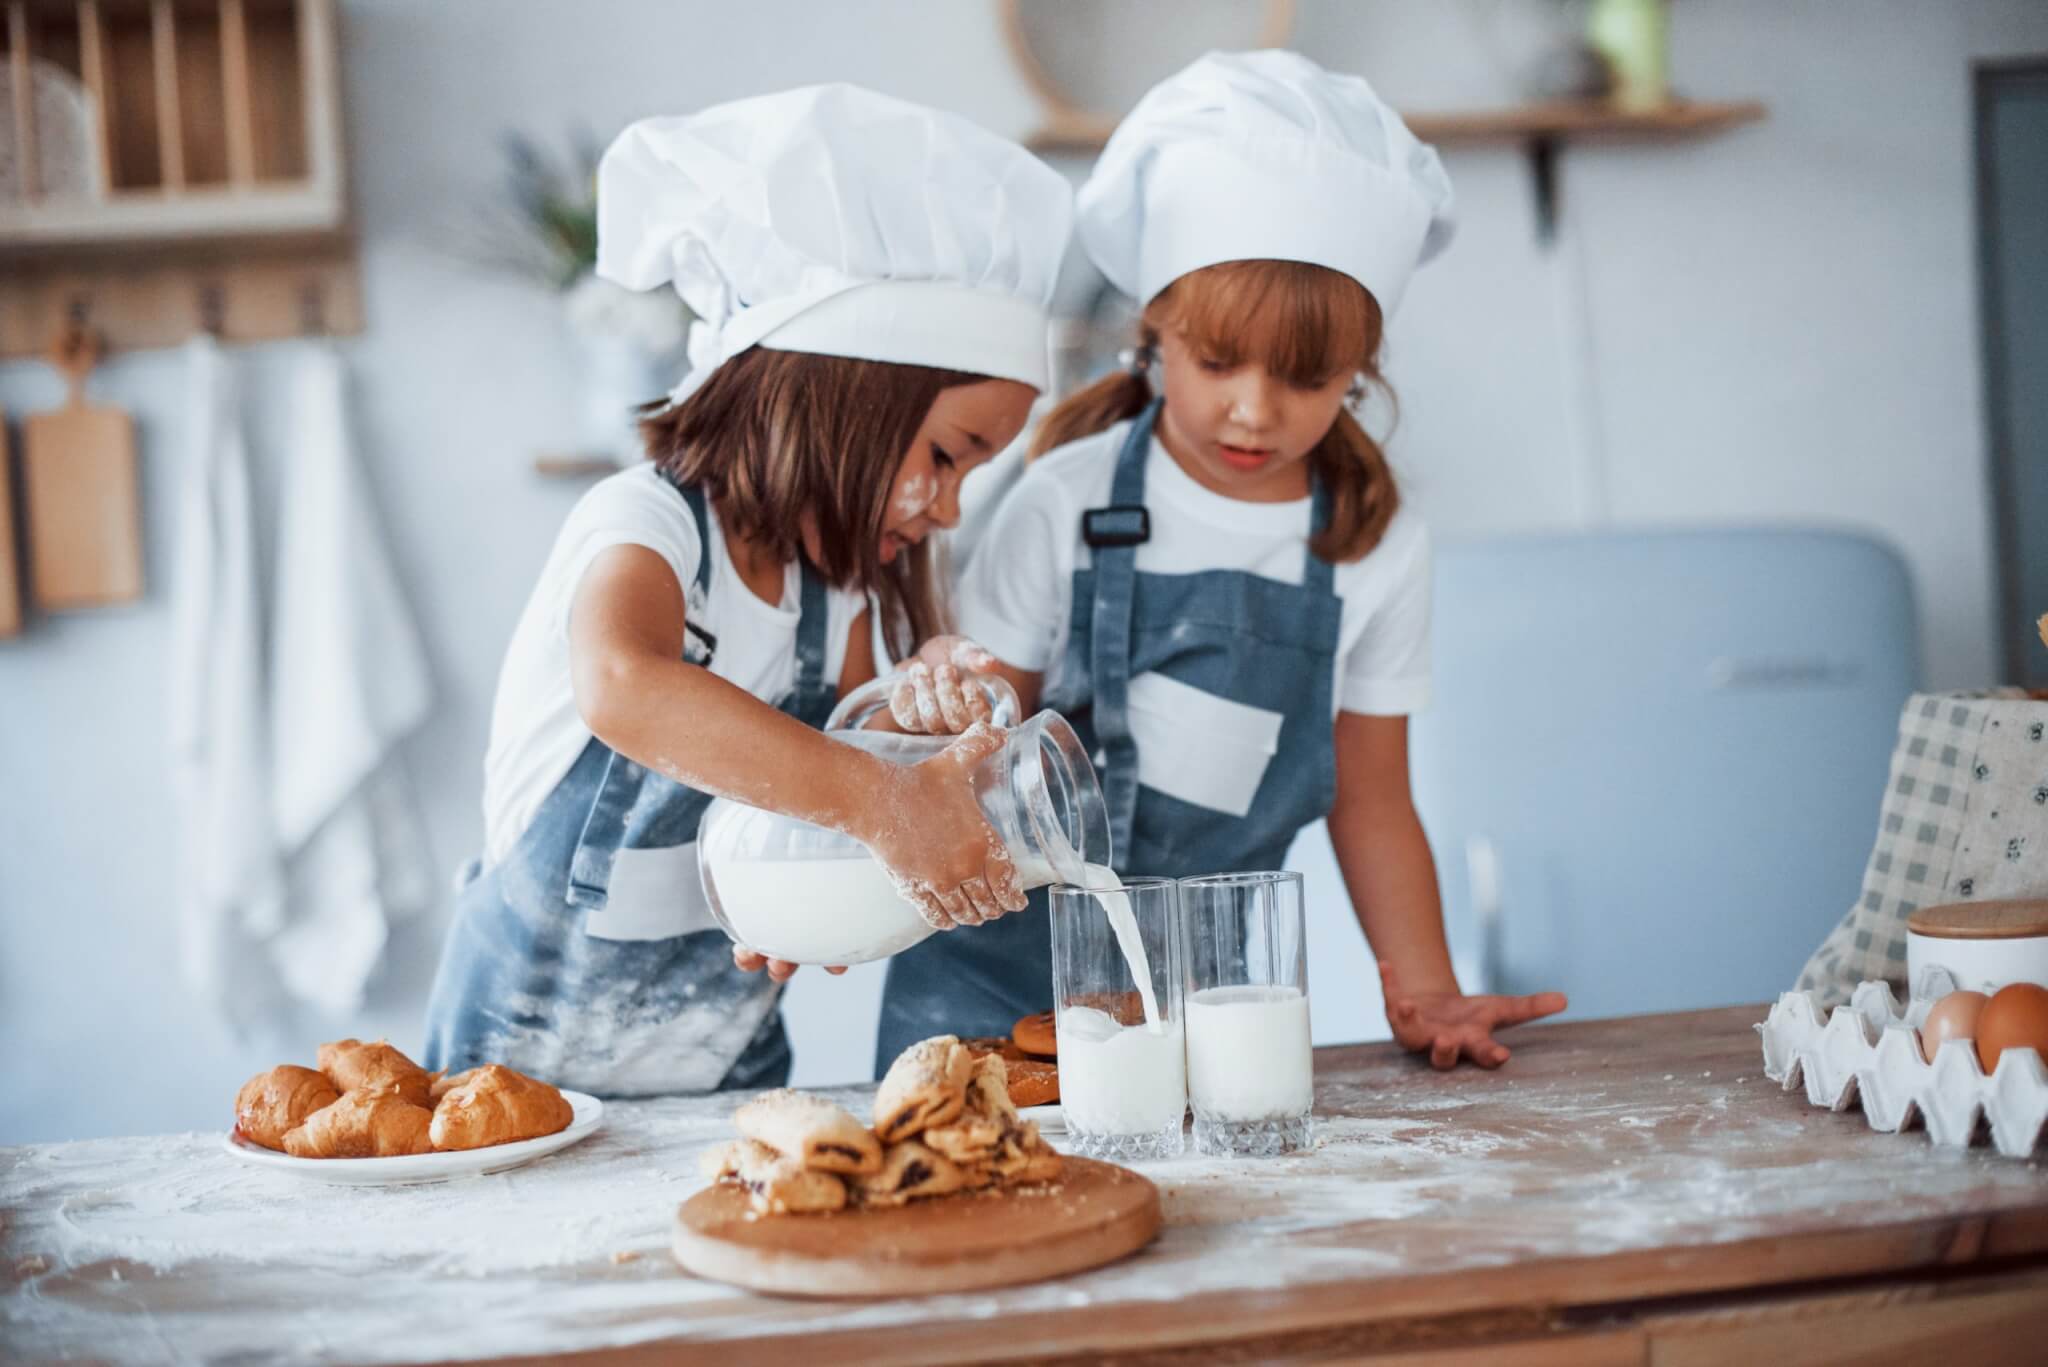 Easiest Recipes To Bake With Kids: Top 5 Child-Friendly Dishes Most Recommended By Food Experts